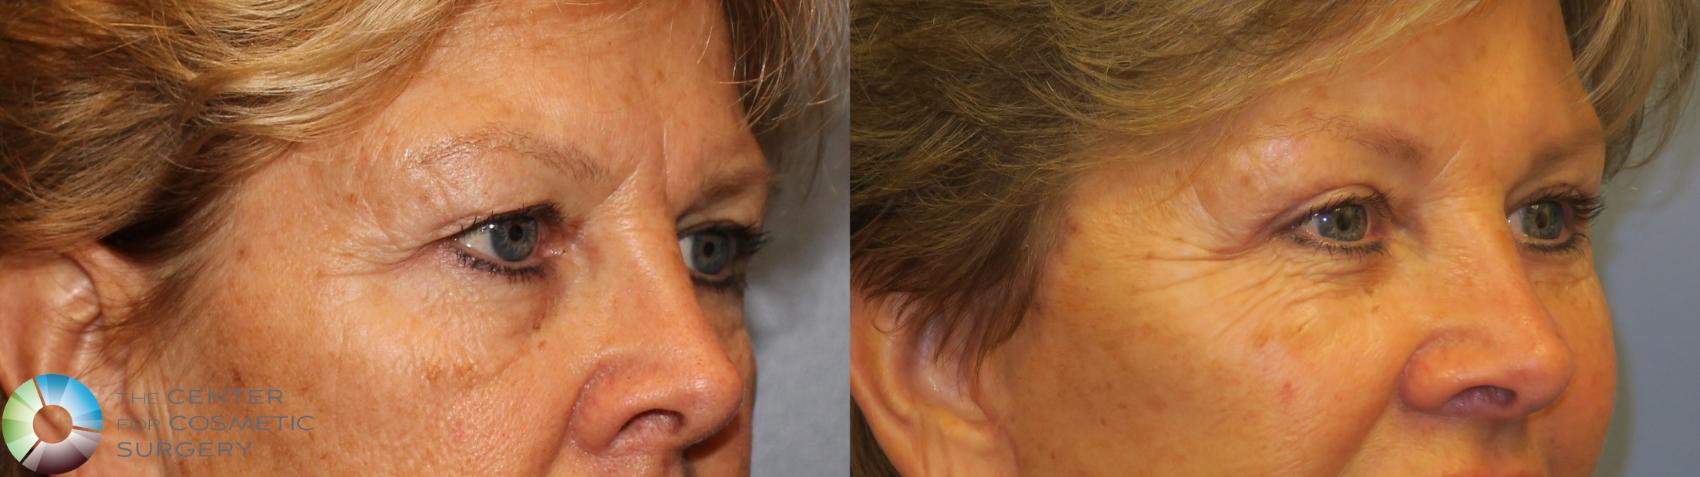 Before & After Eyelid Lift Case 11486 brow eyes oblique View in Golden, CO